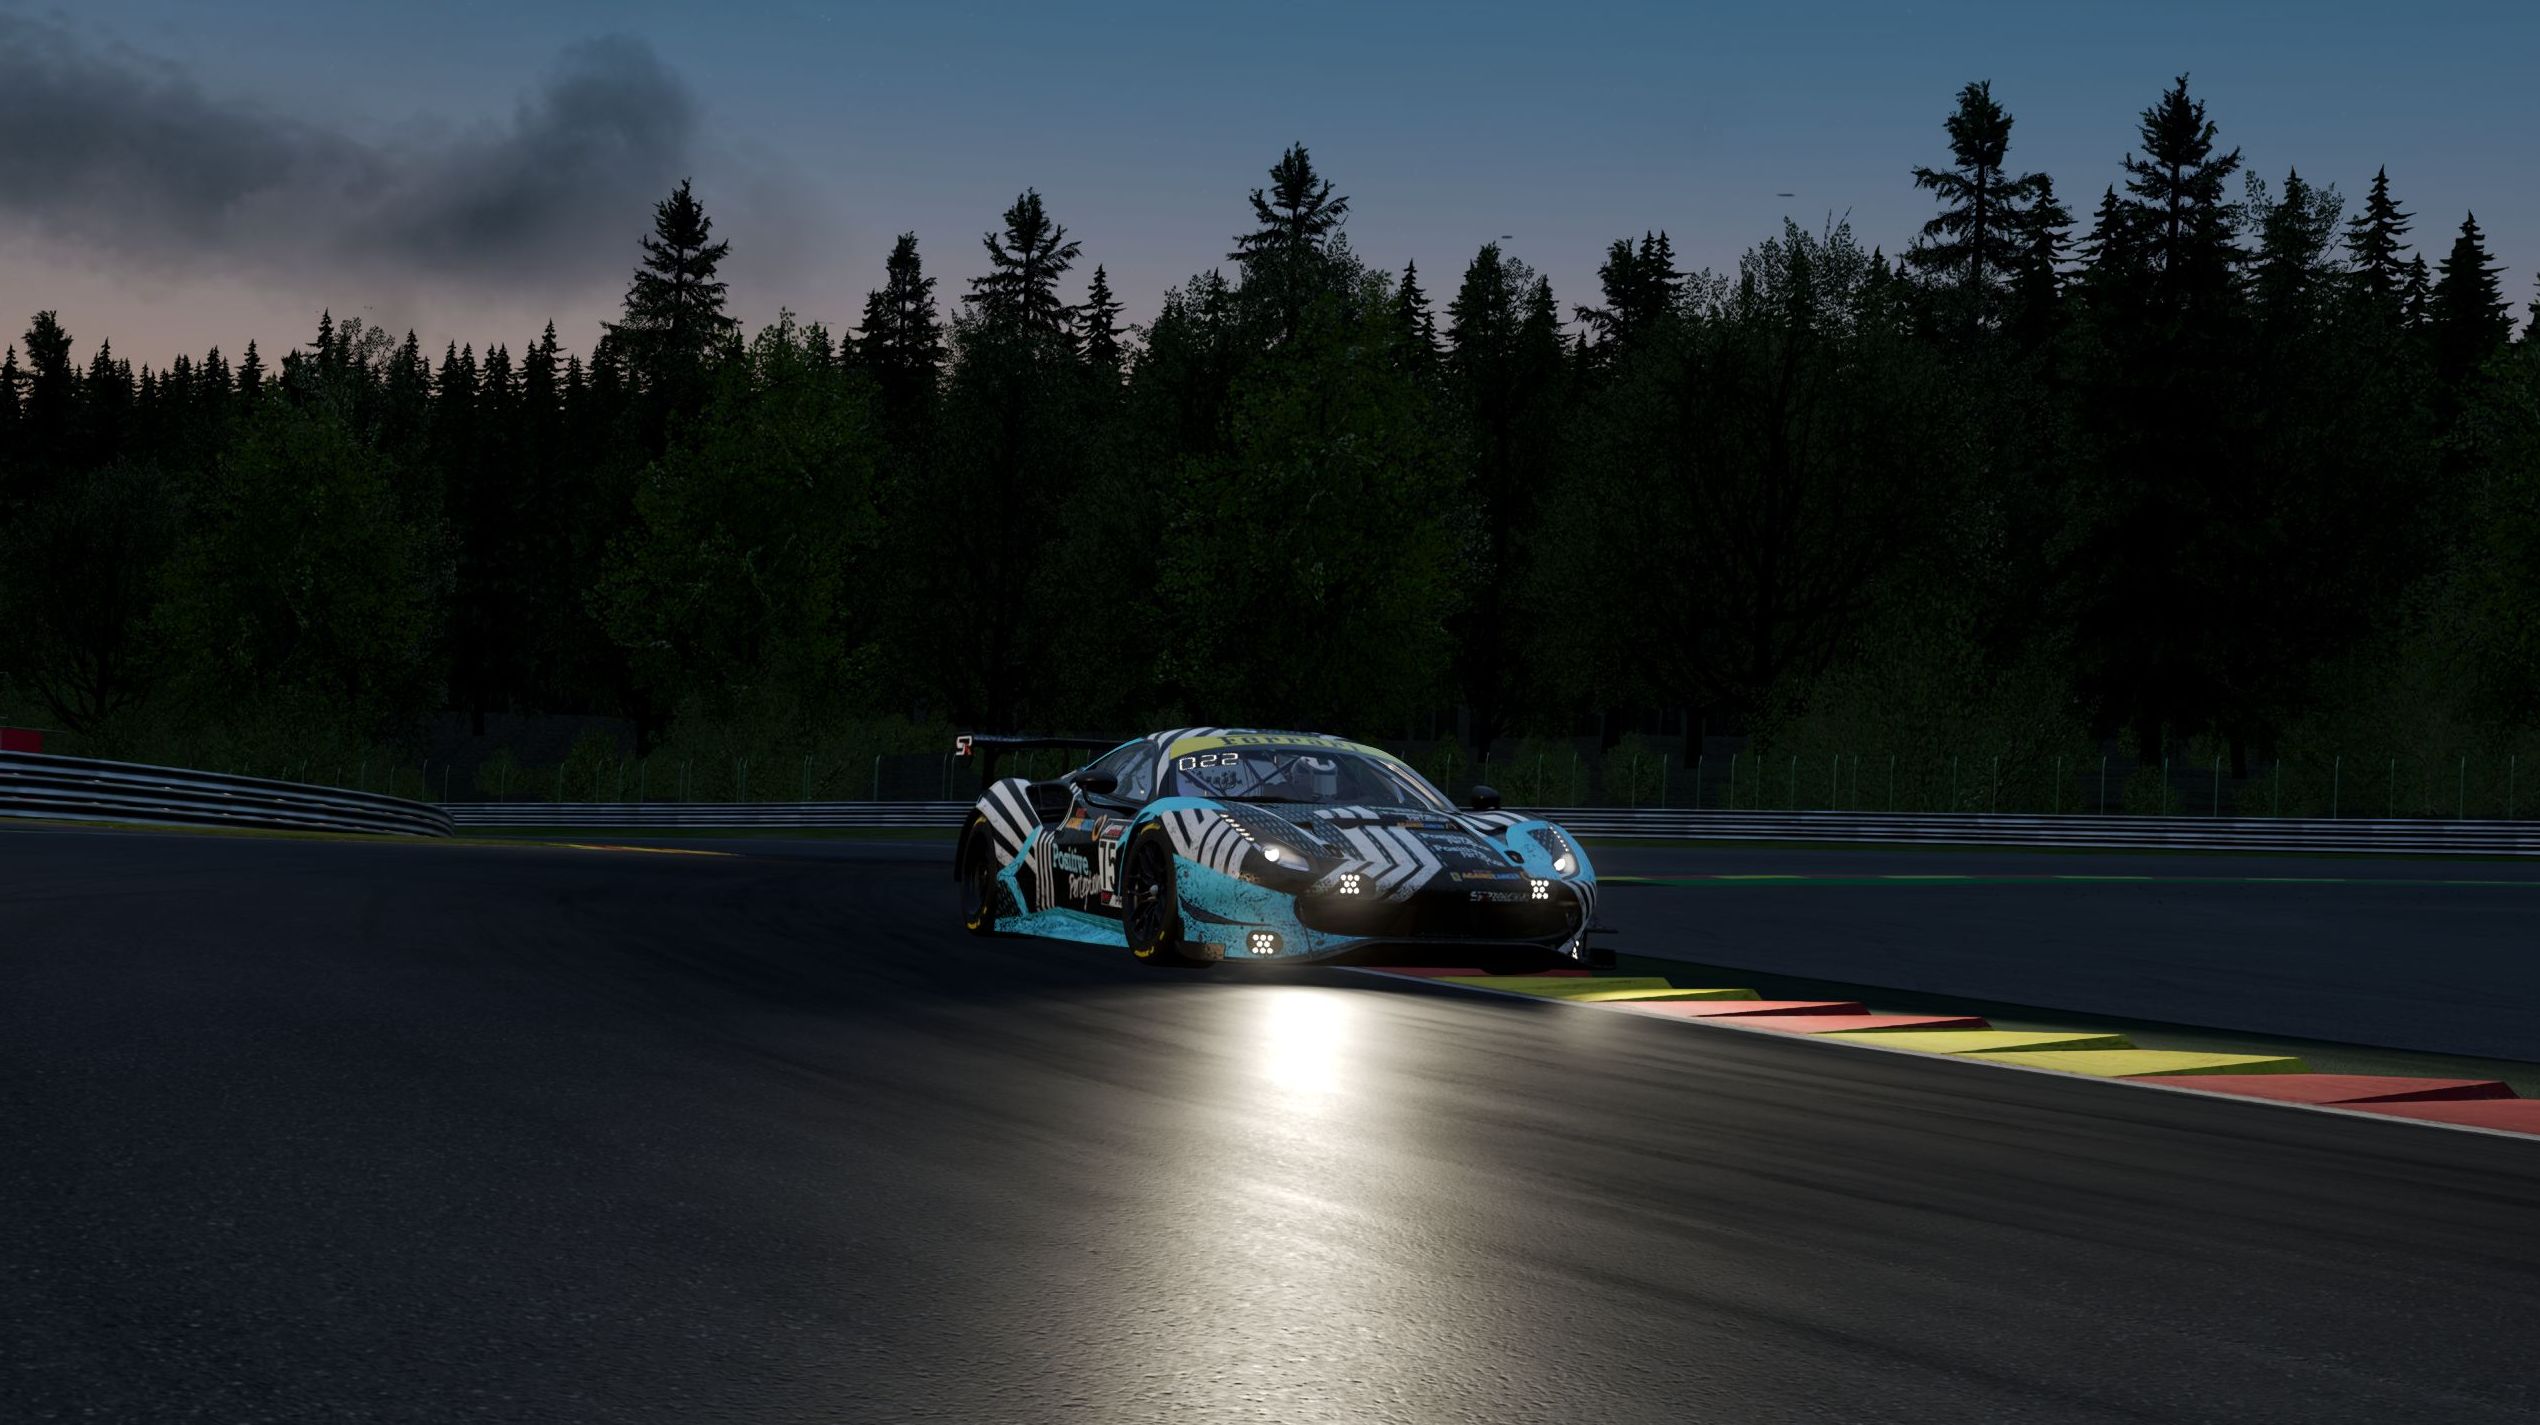 SimSport Racing International’s 24h of Spa-Francorchamps in aid of Against Cancer